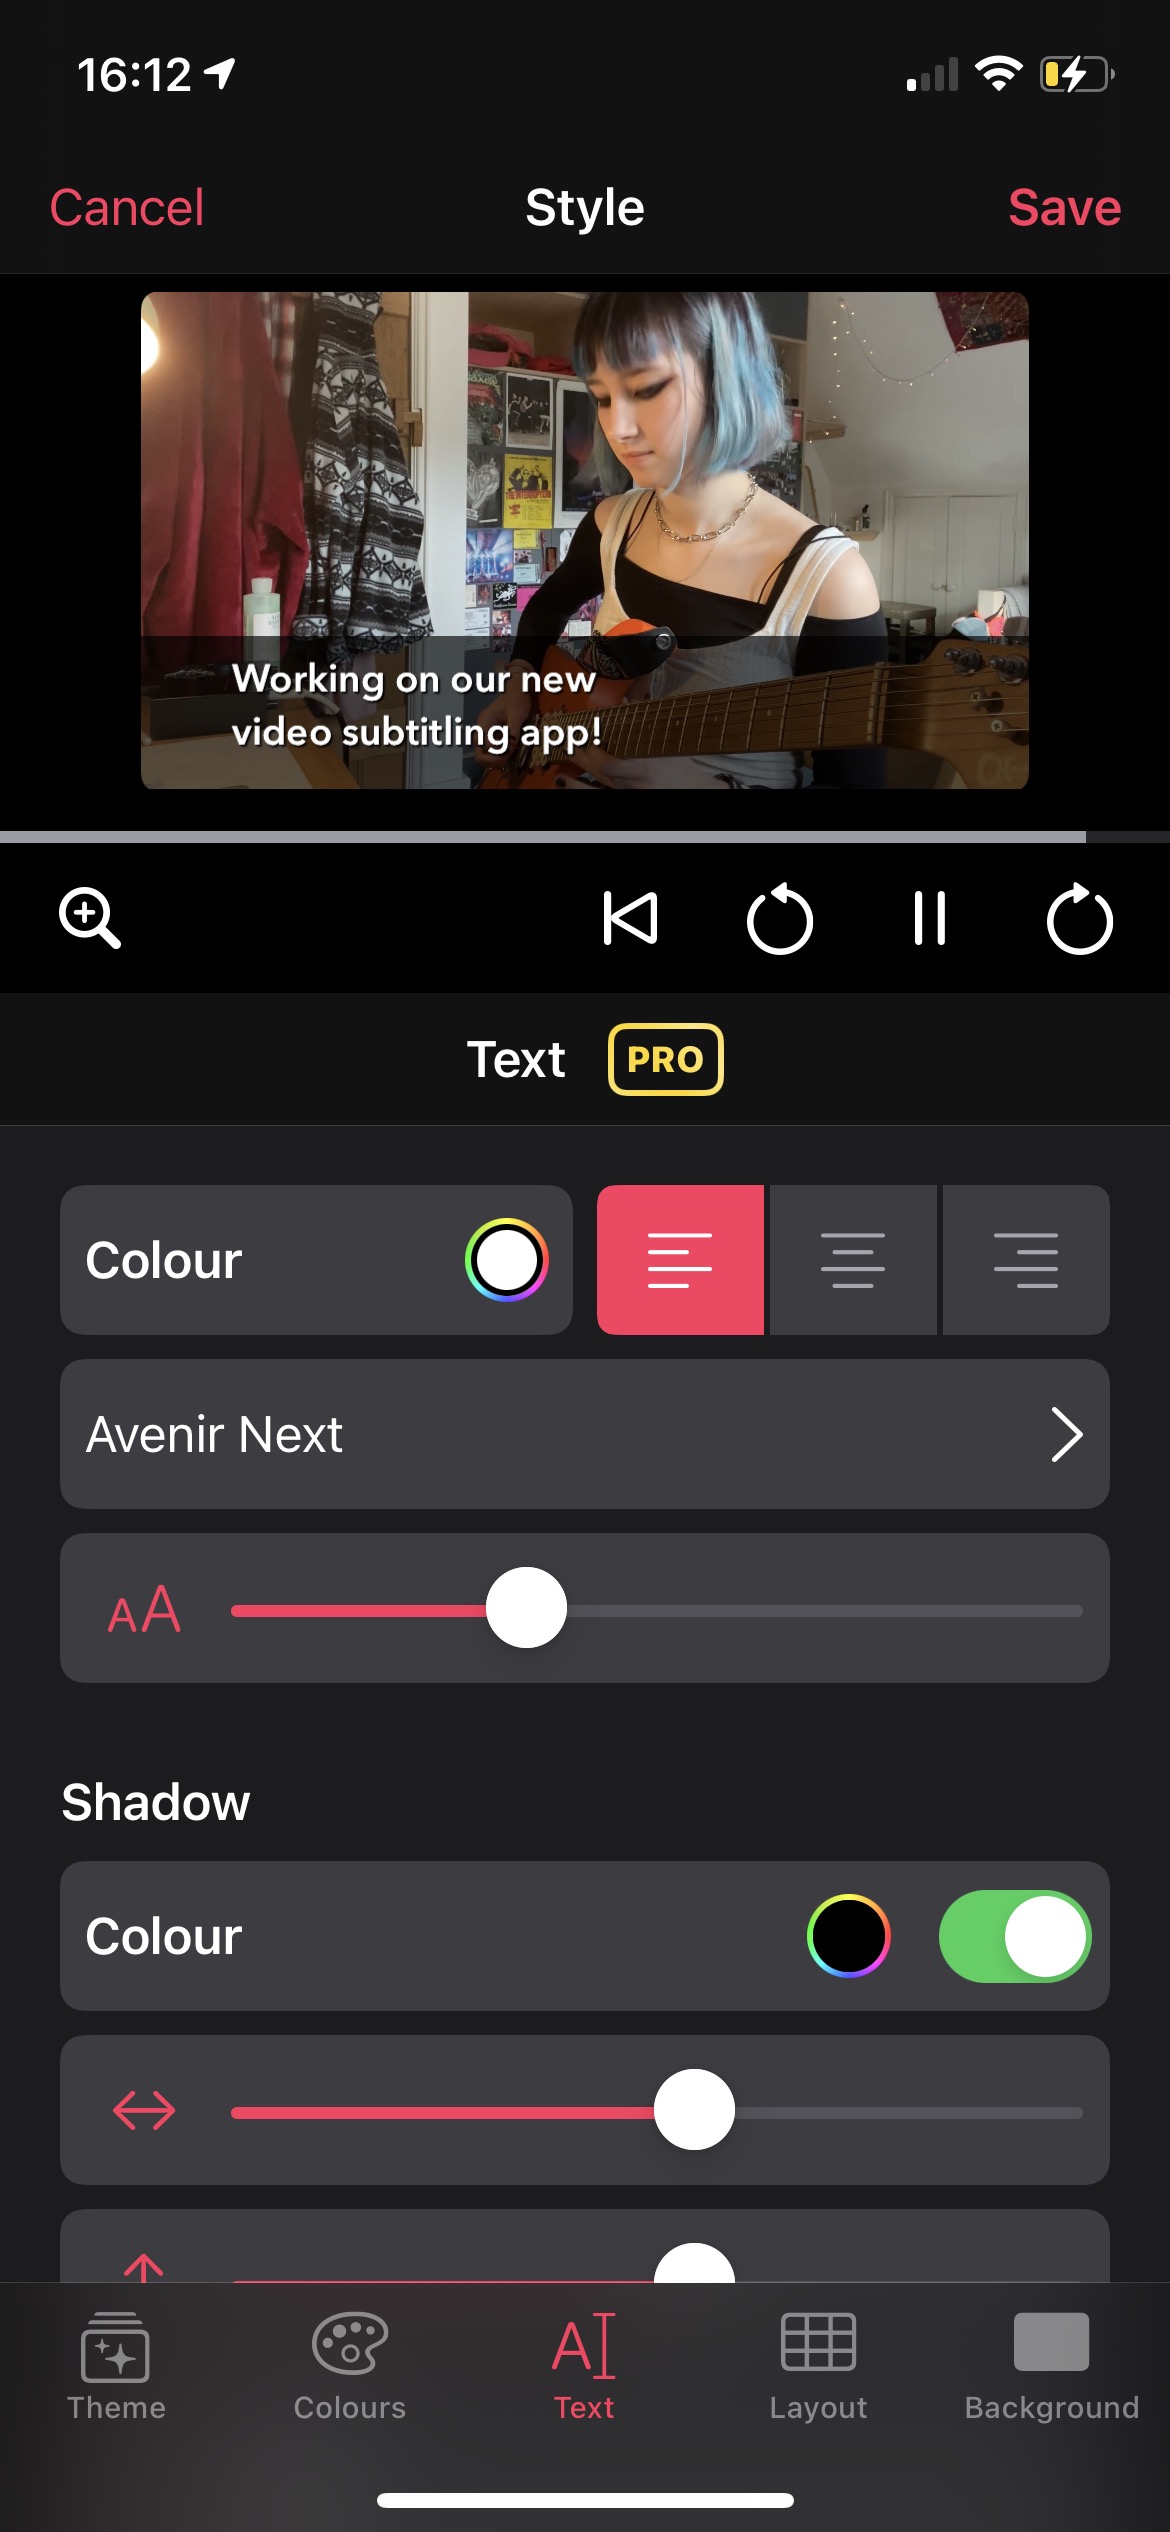 Screenshot of a the new styling UI showing a video and the subtitle text formatting options